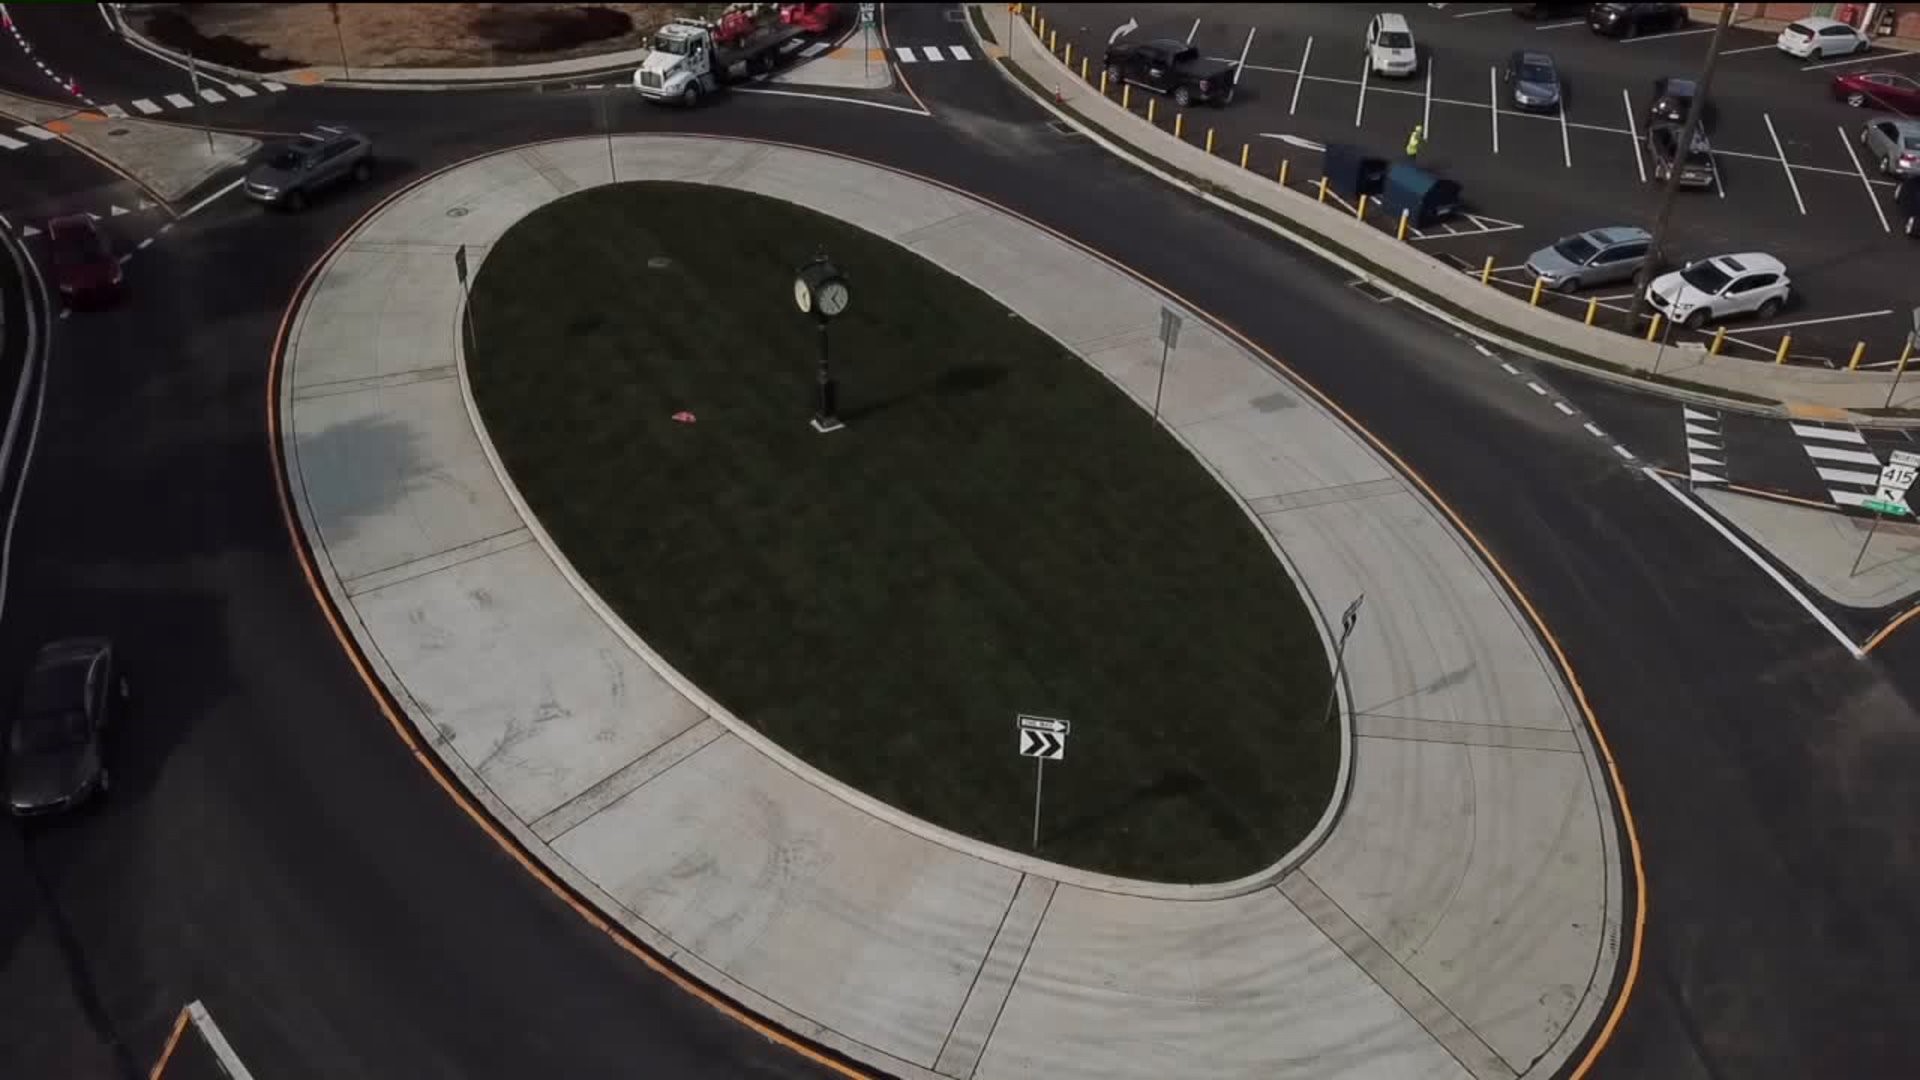 Roundabout Construction Completed Ahead of Schedule